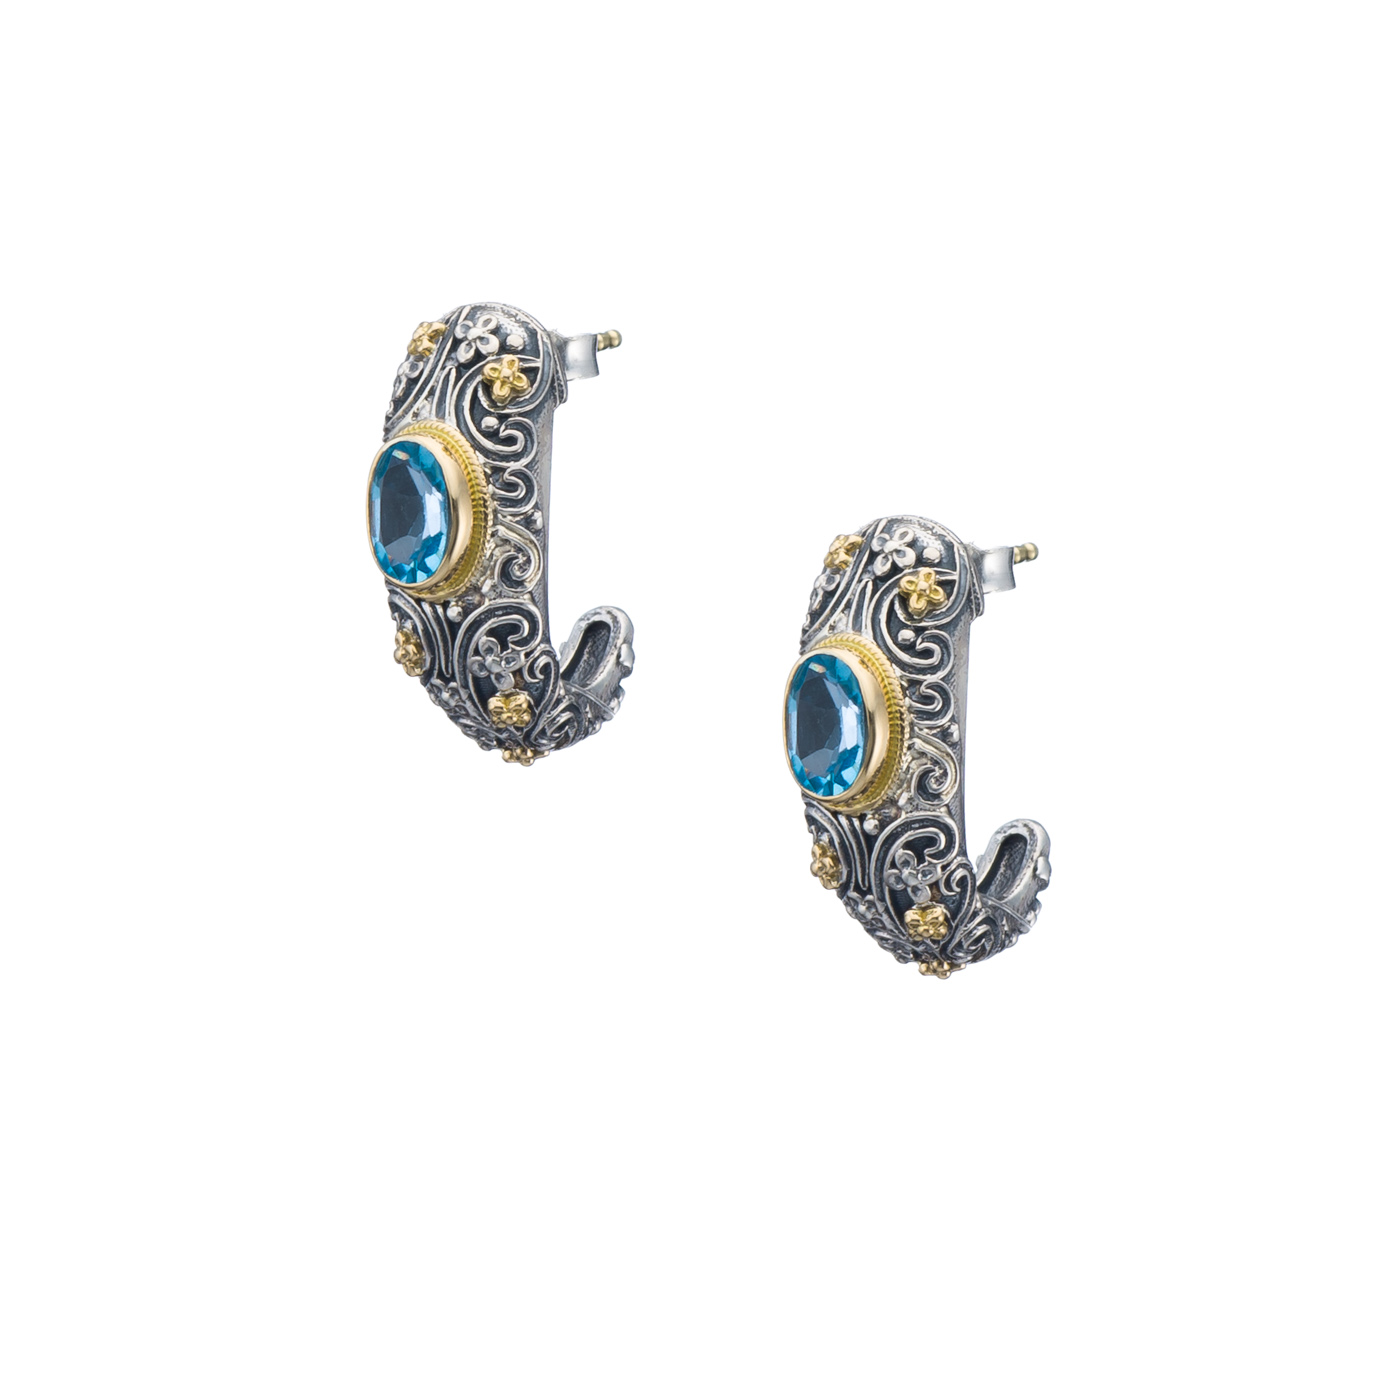 Eve half hoops earrings in 18K Gold and Sterling silver with gemstones